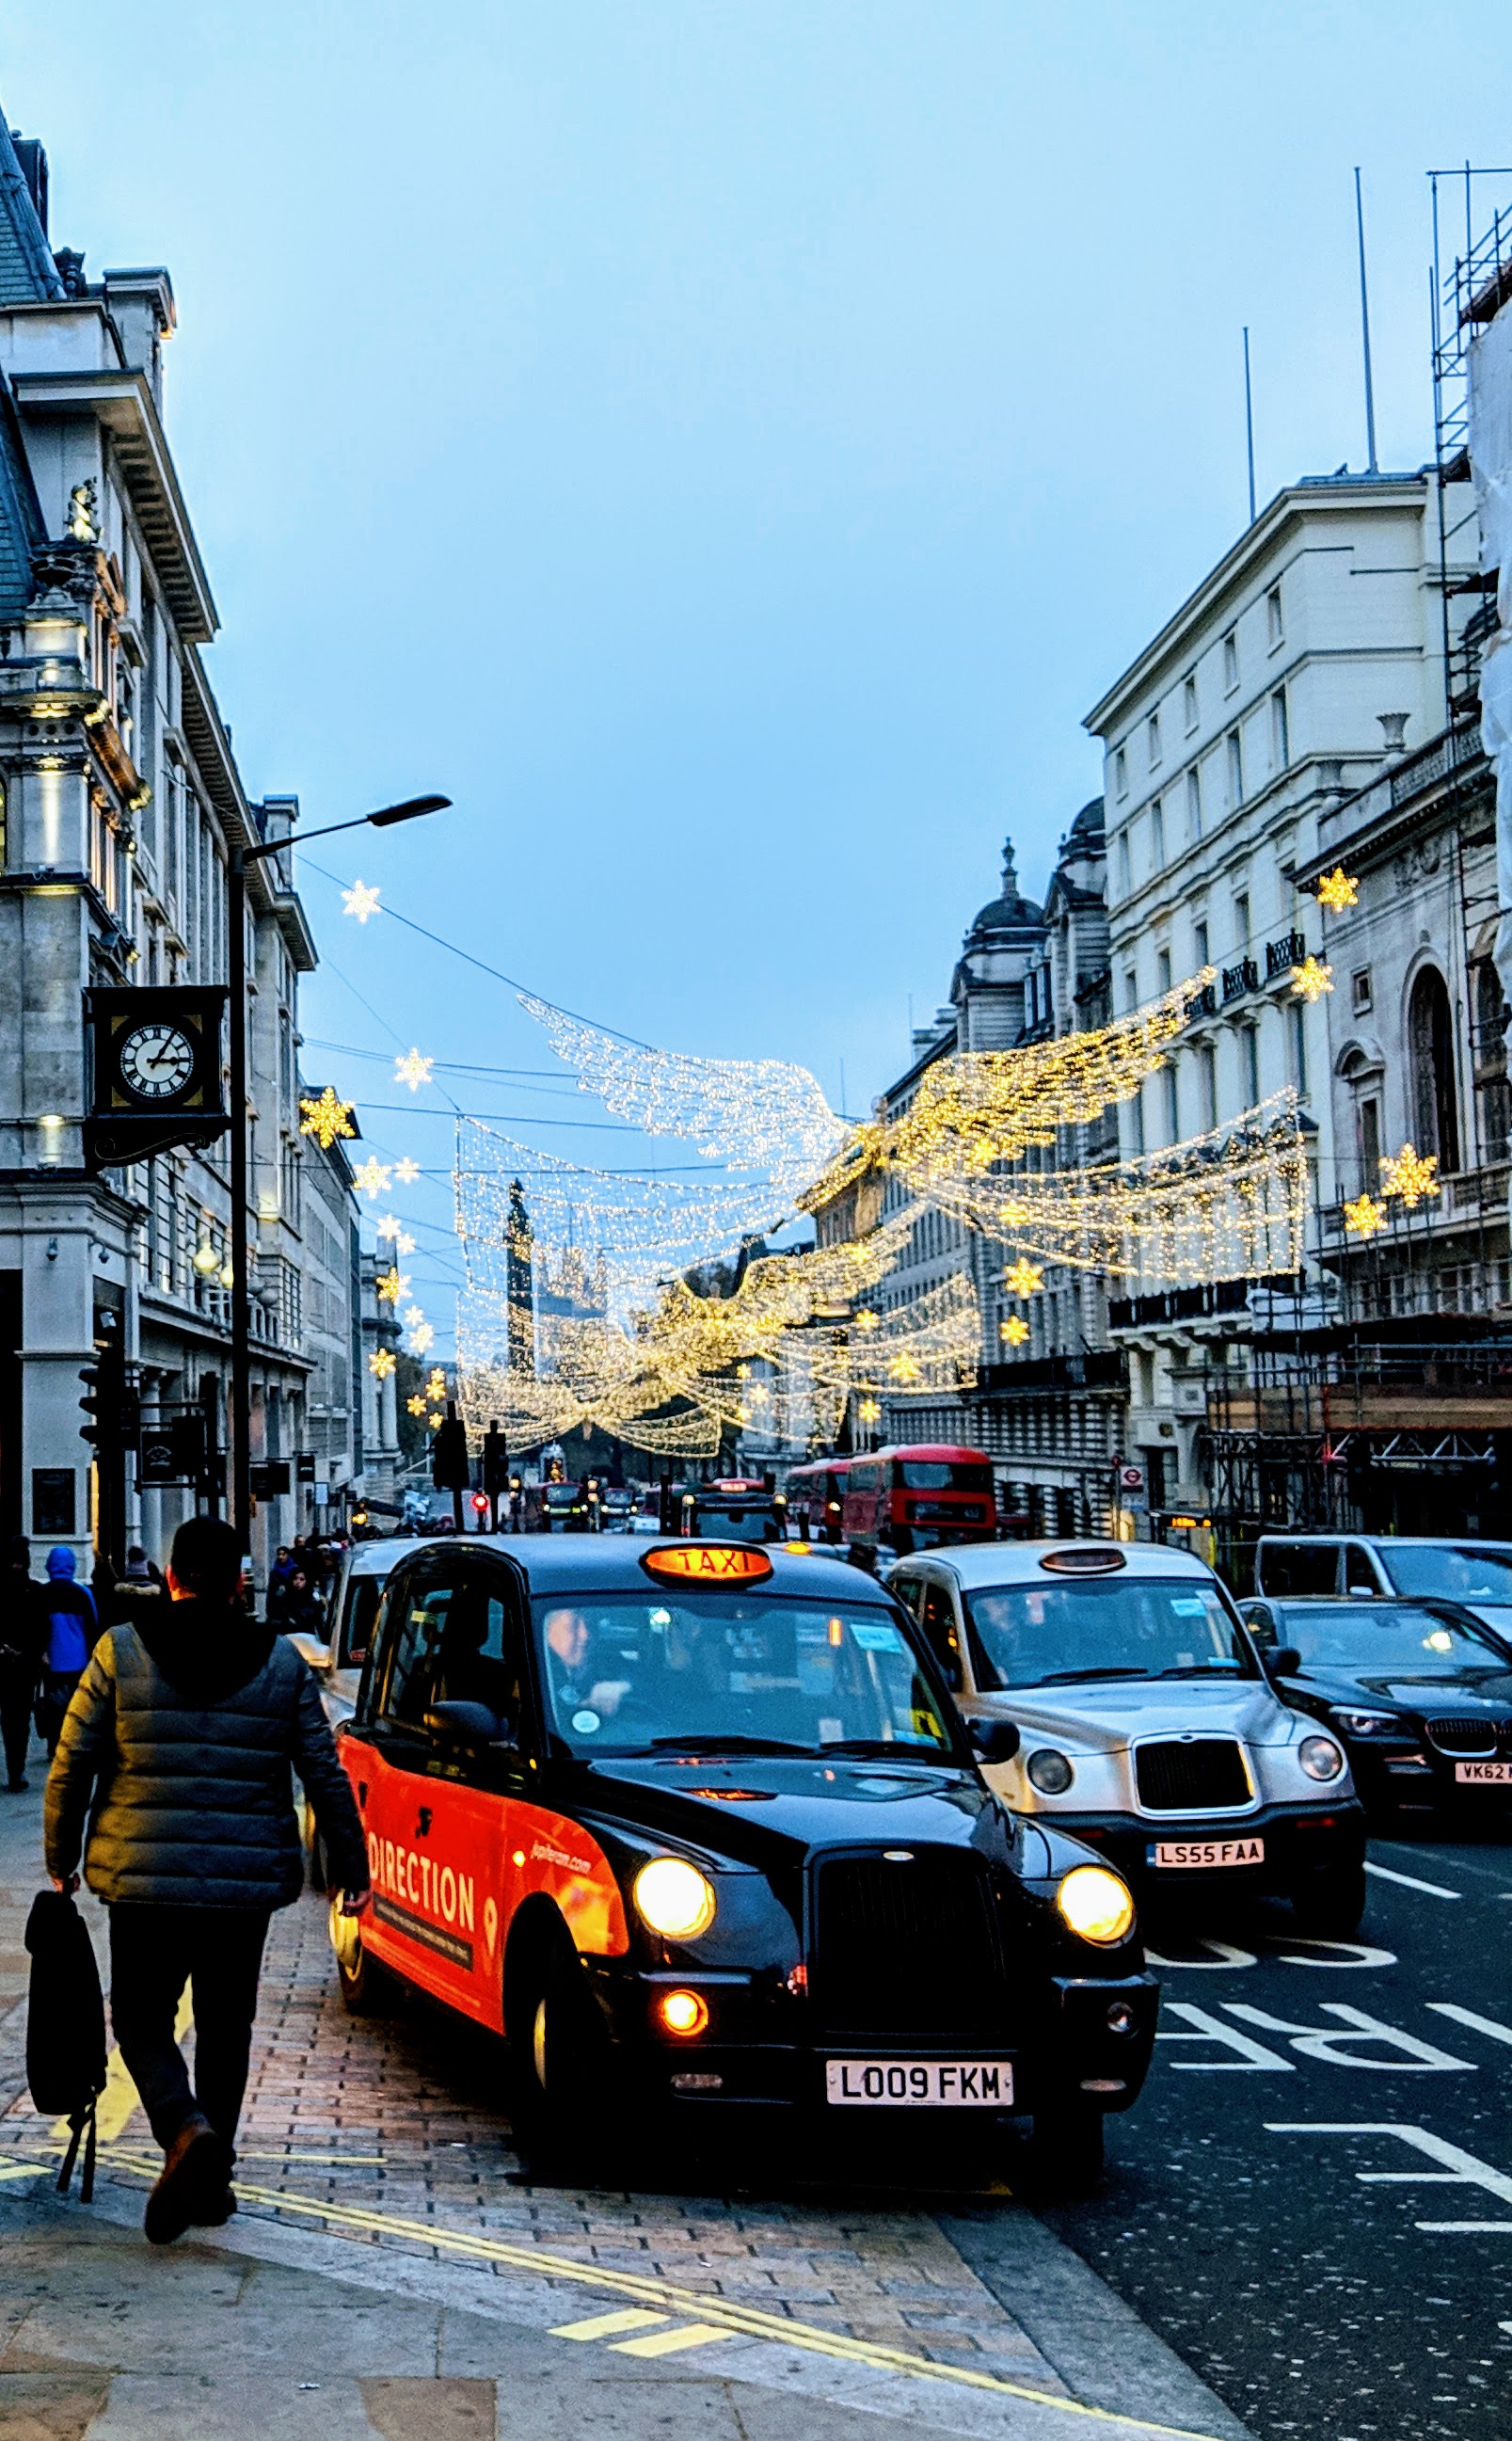 What to do during the festive season in London